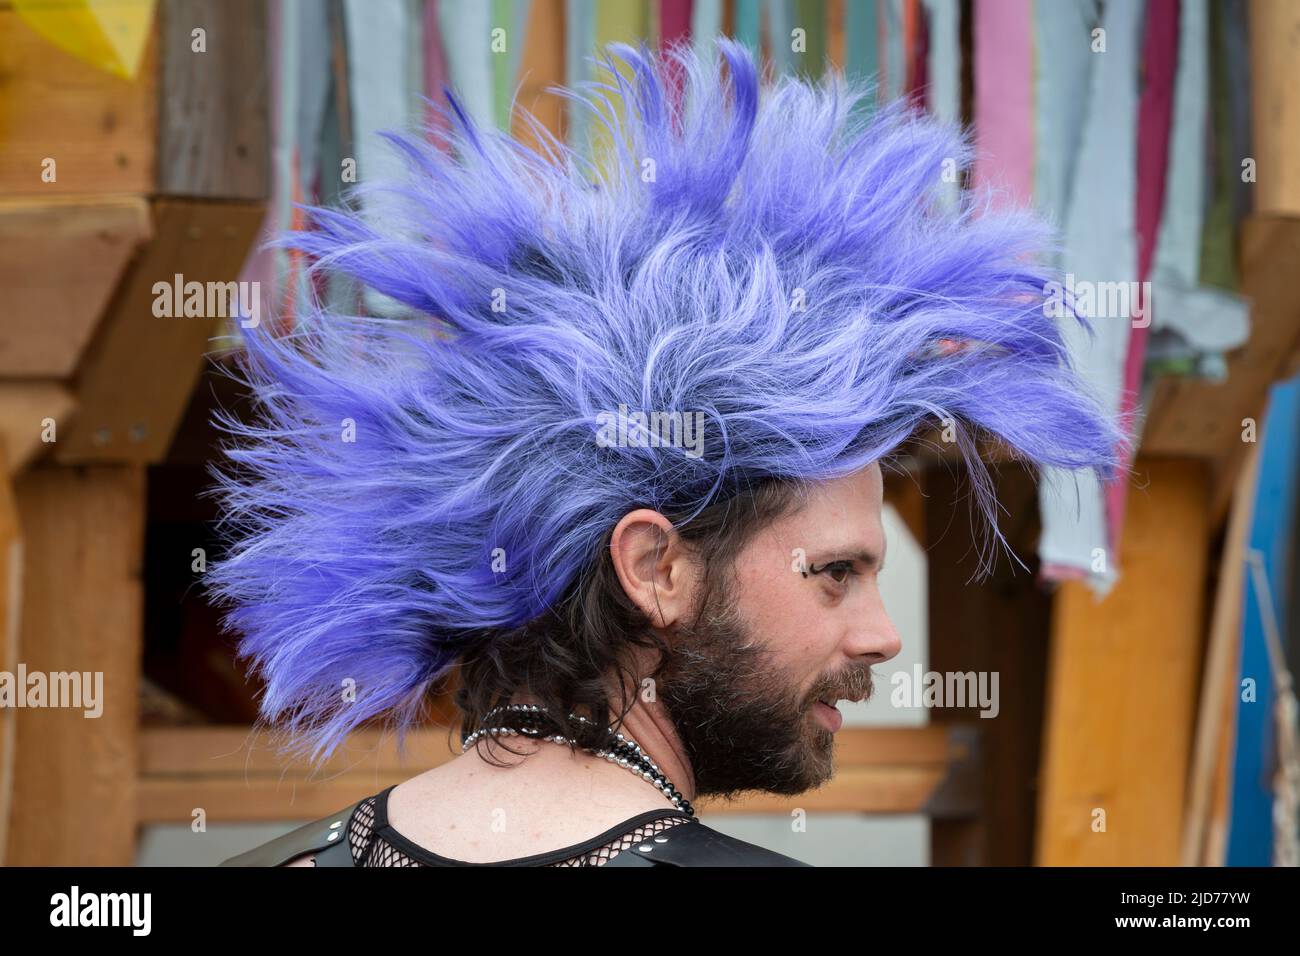 Seattle, Washington, USA. 18th June, 2022. A young man wears a colorful mohawk at the Fremont Solstice Parade. The iconic, annual parade returned after a three-year hiatus due to the coronavirus pandemic. Credit: Paul Christian Gordon/Alamy Live News Stock Photo